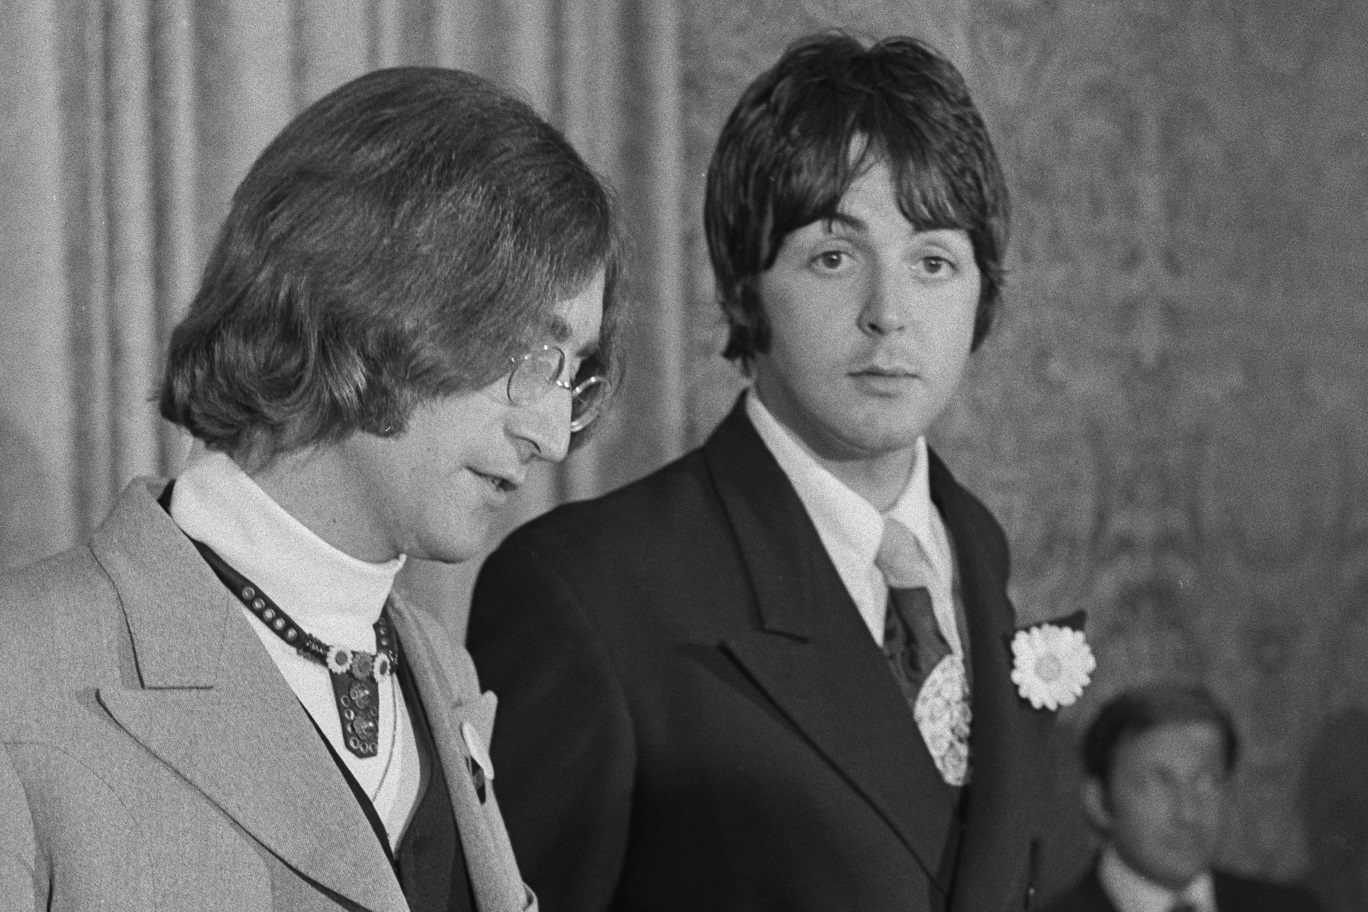 John Lennon and Paul McCartney at a press conference